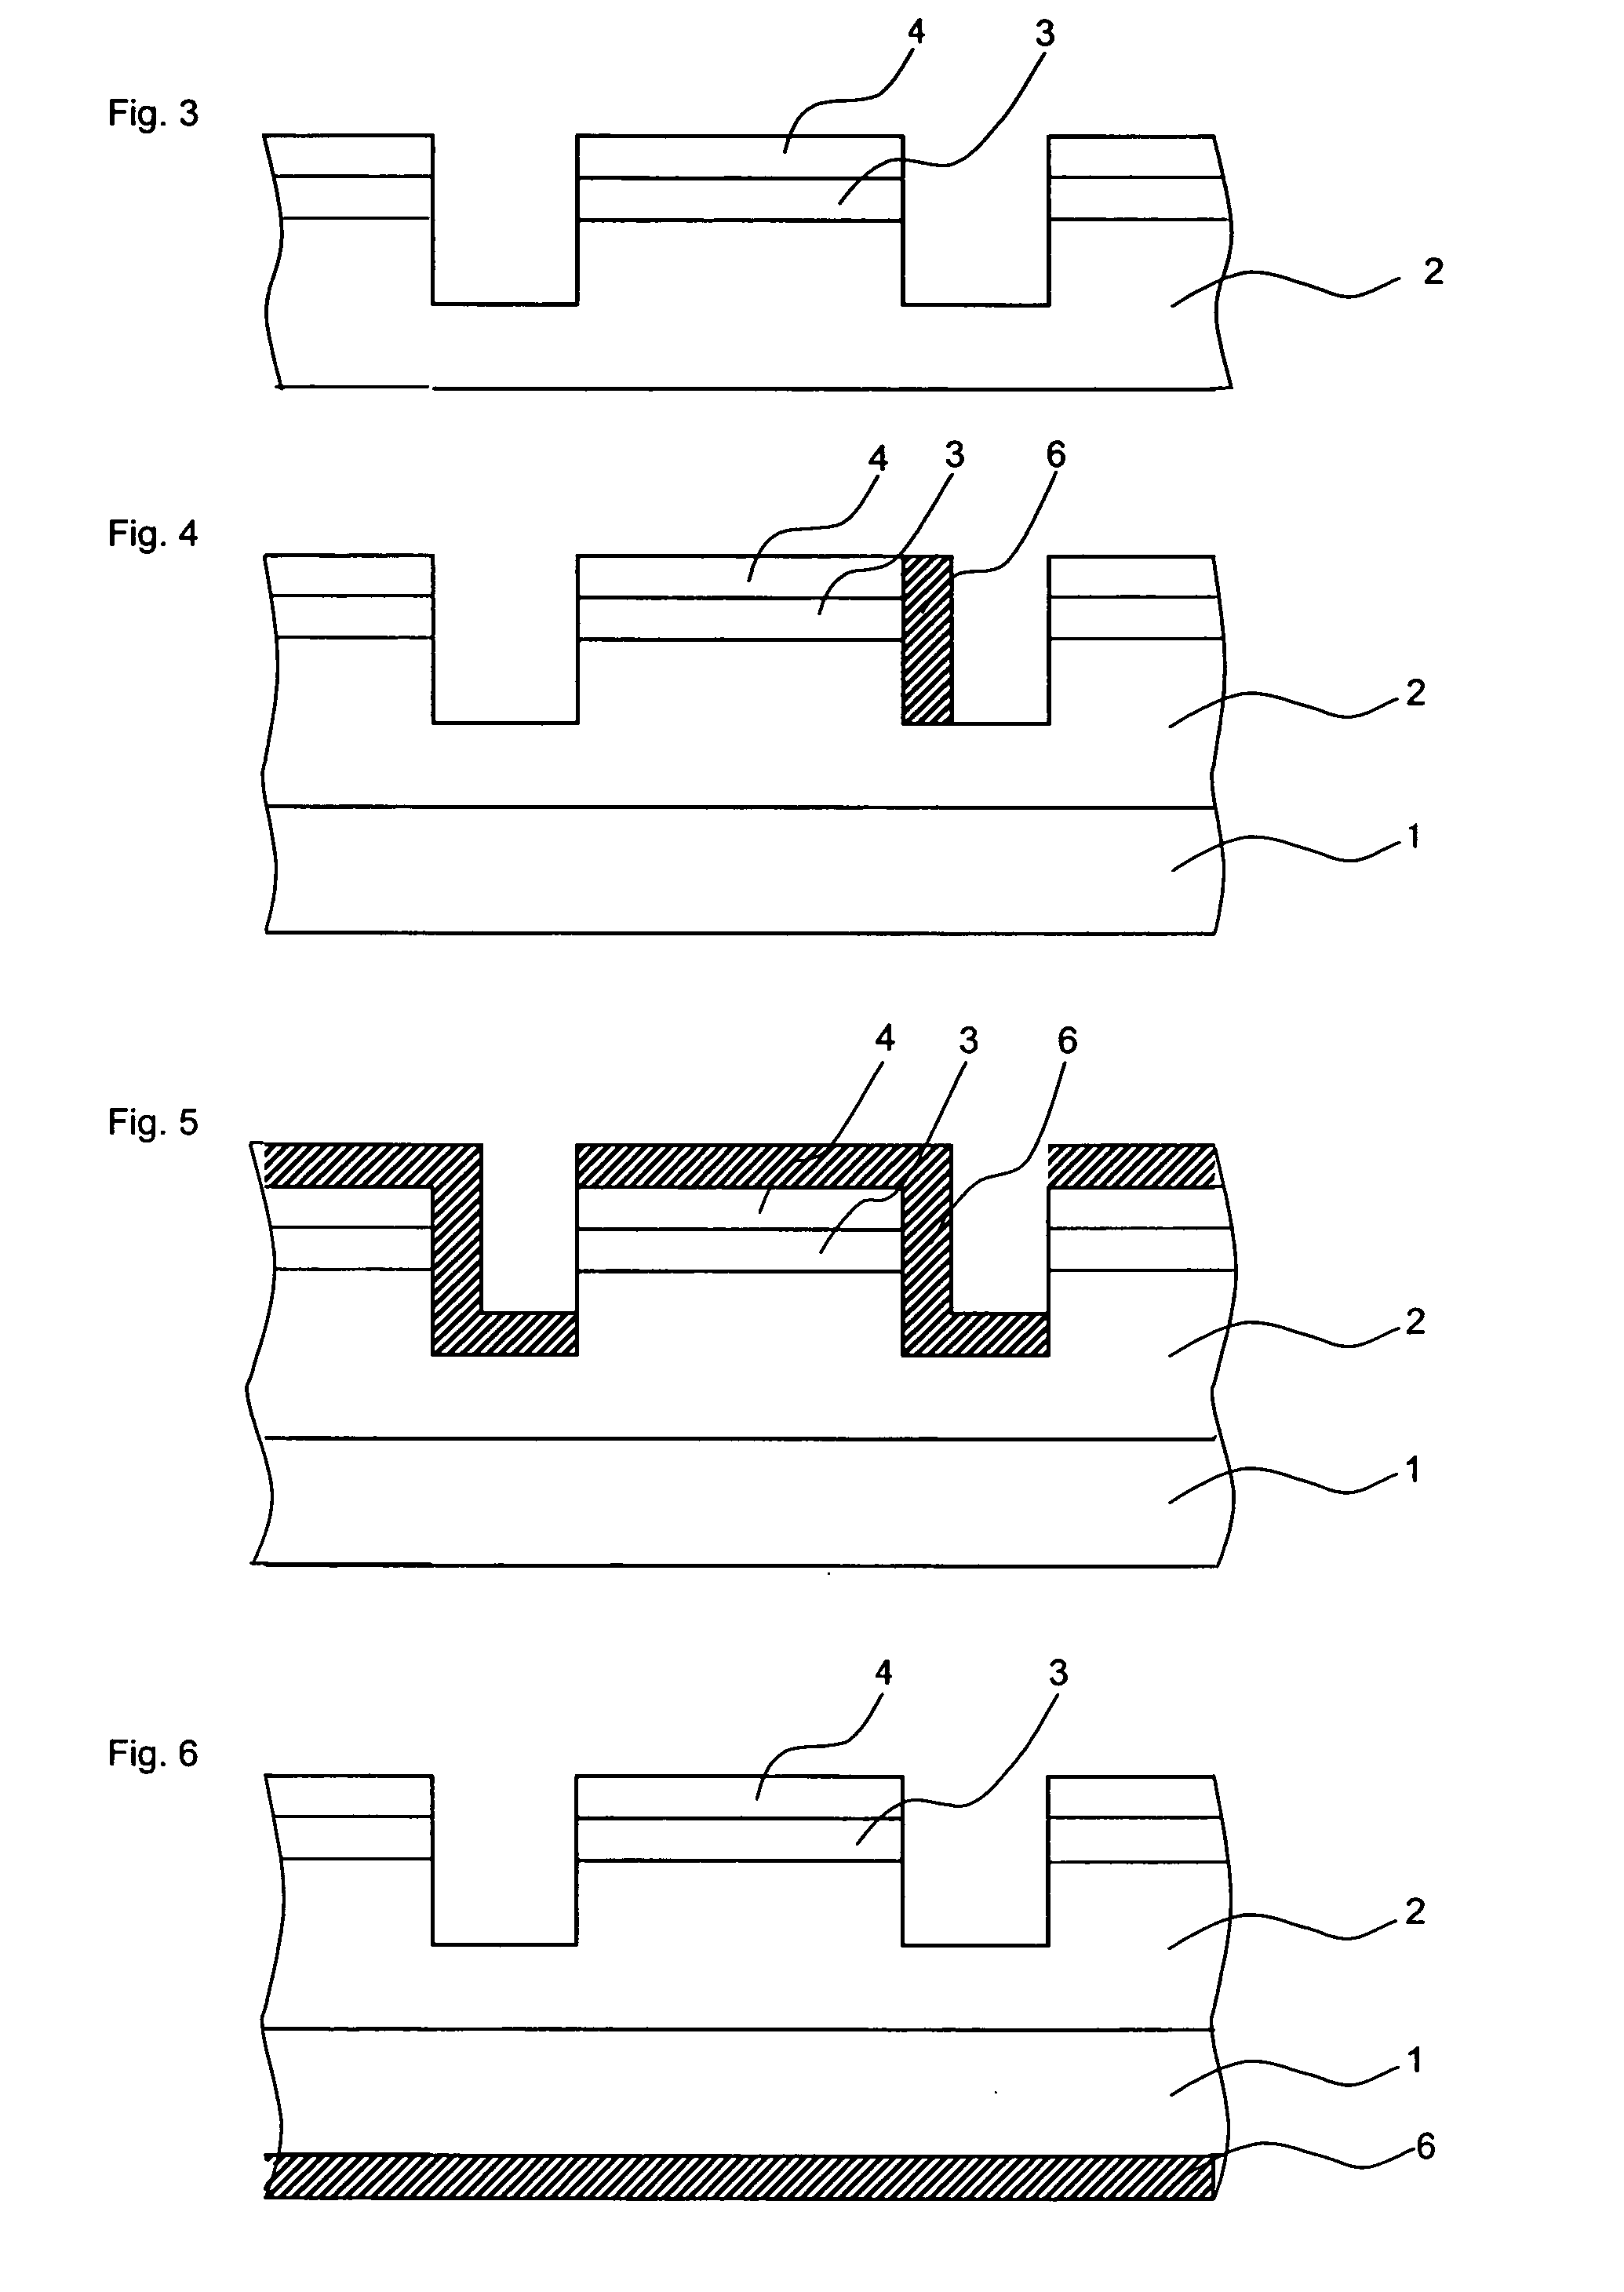 Nitride semiconductor laser device and a method for improving its performance